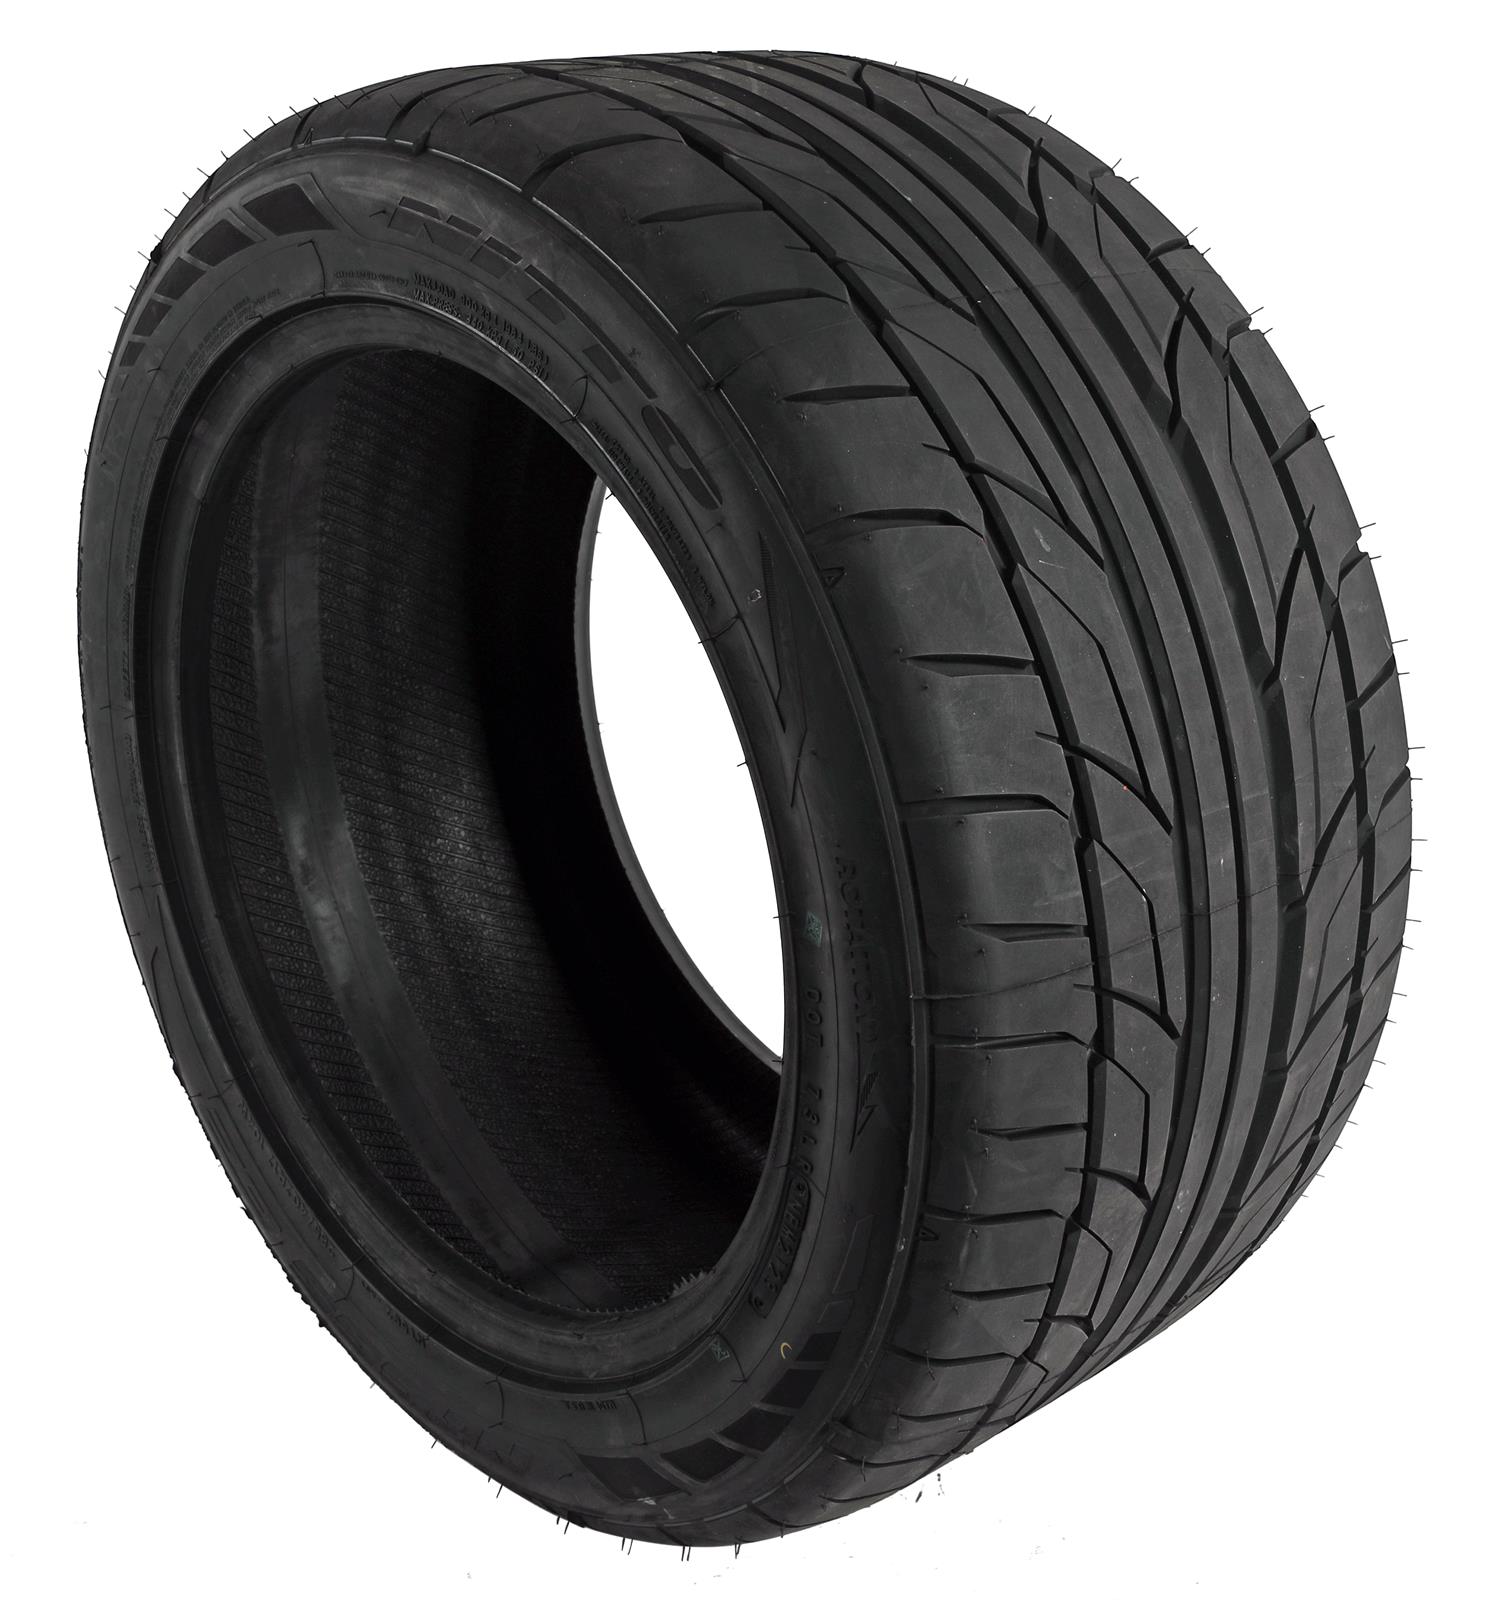 Nitto Tires N211-380 Nitto NT 555 G2 Tires | Summit Racing